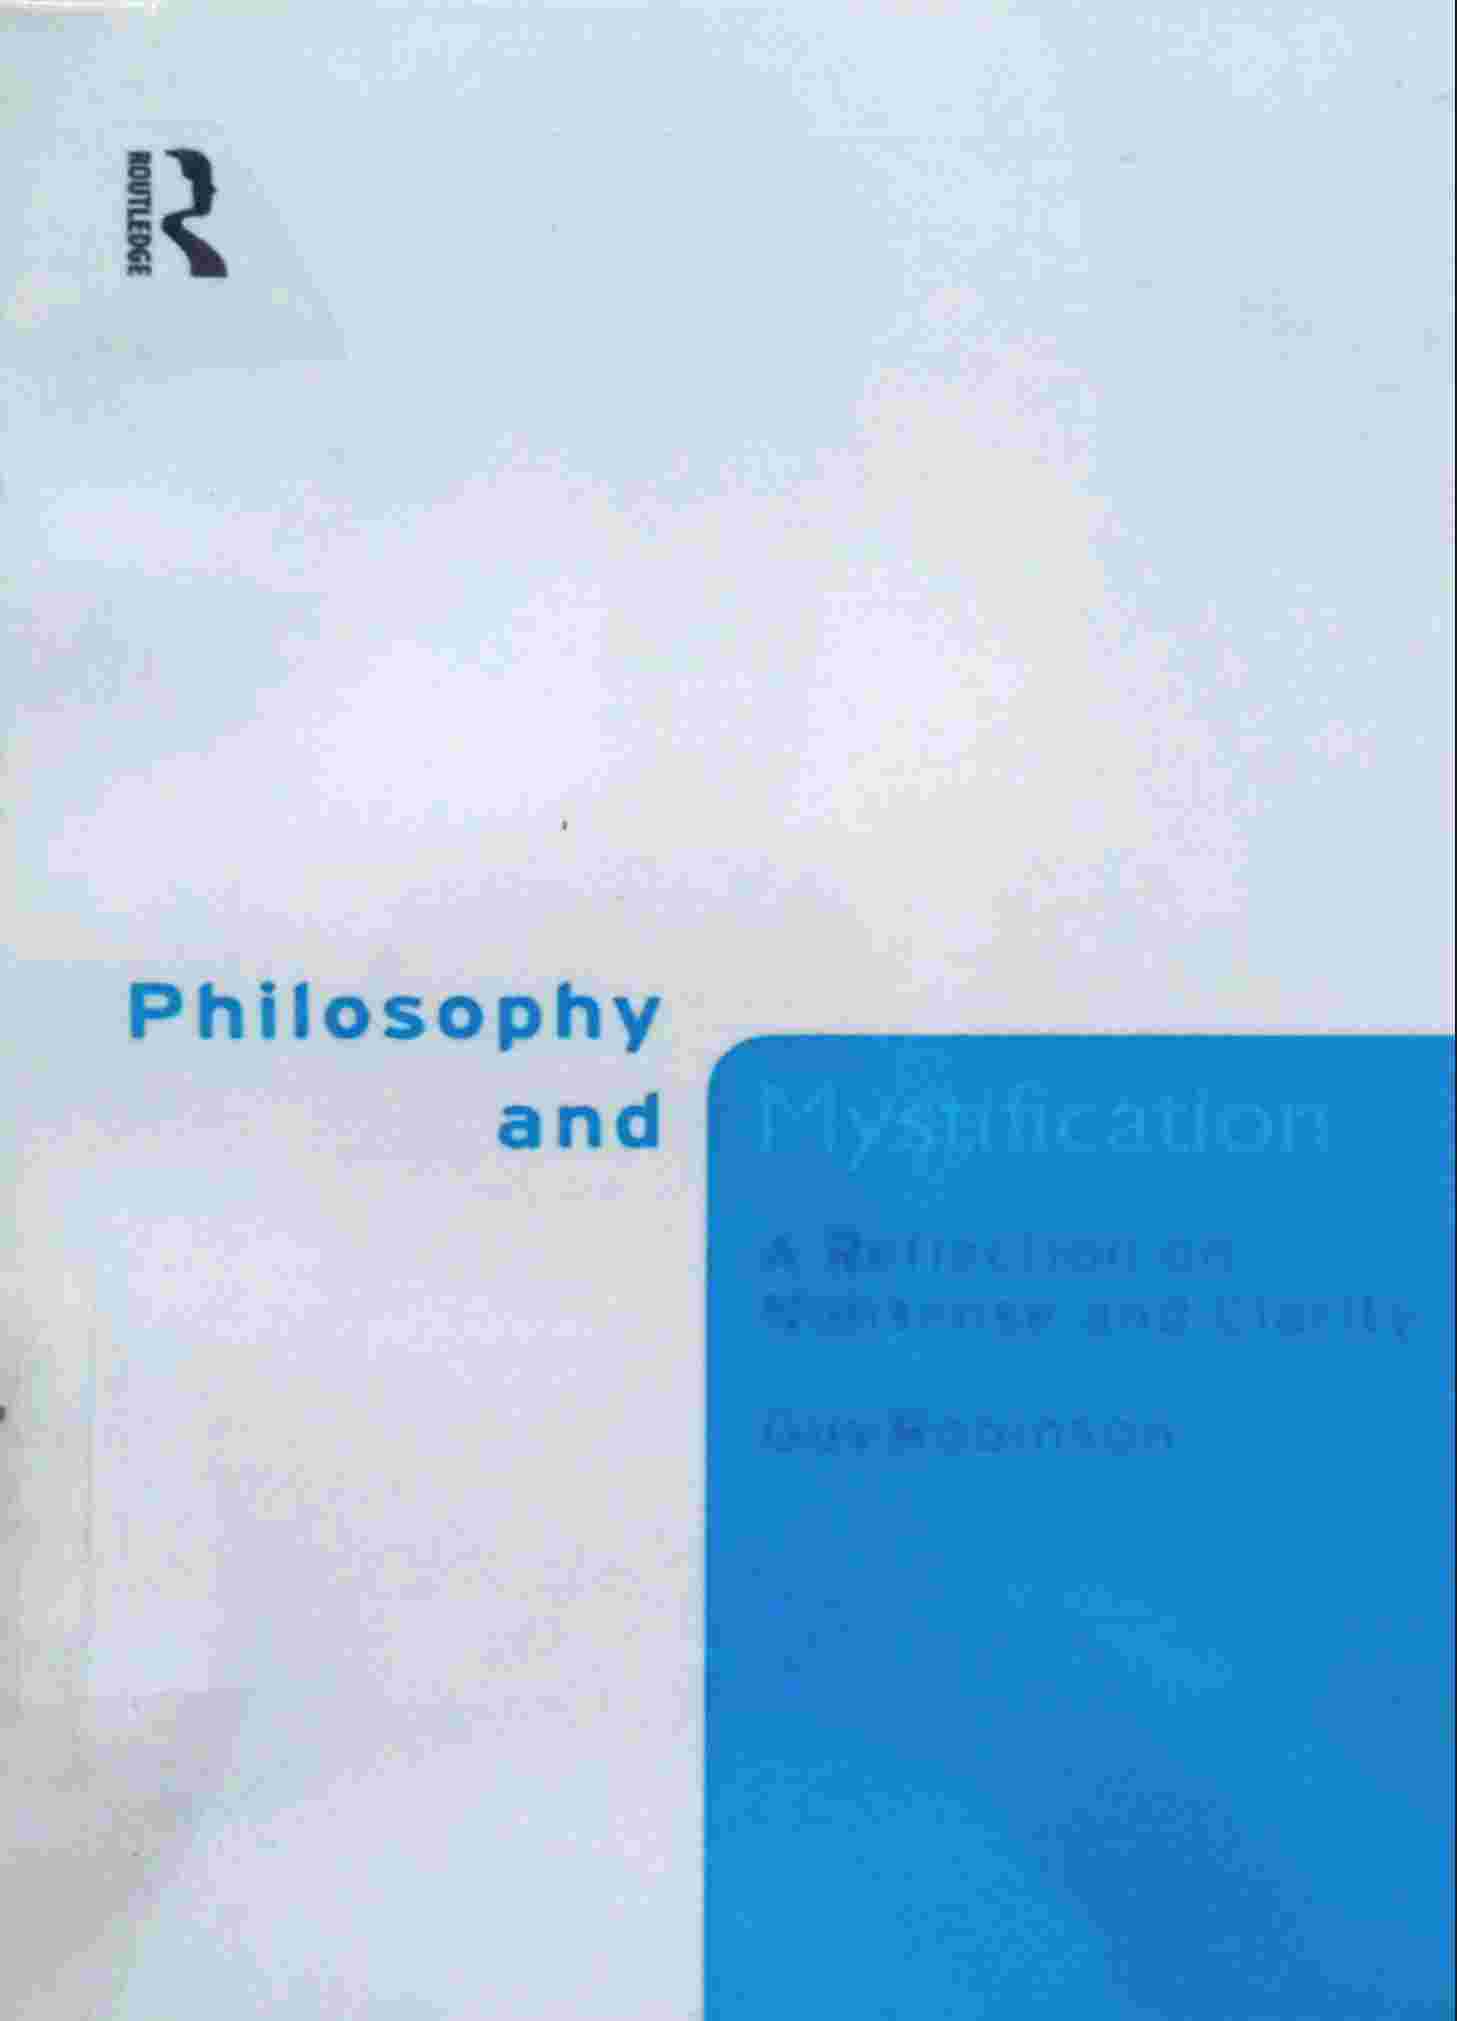 PHILOSOPHY AND MYSTIFICATION